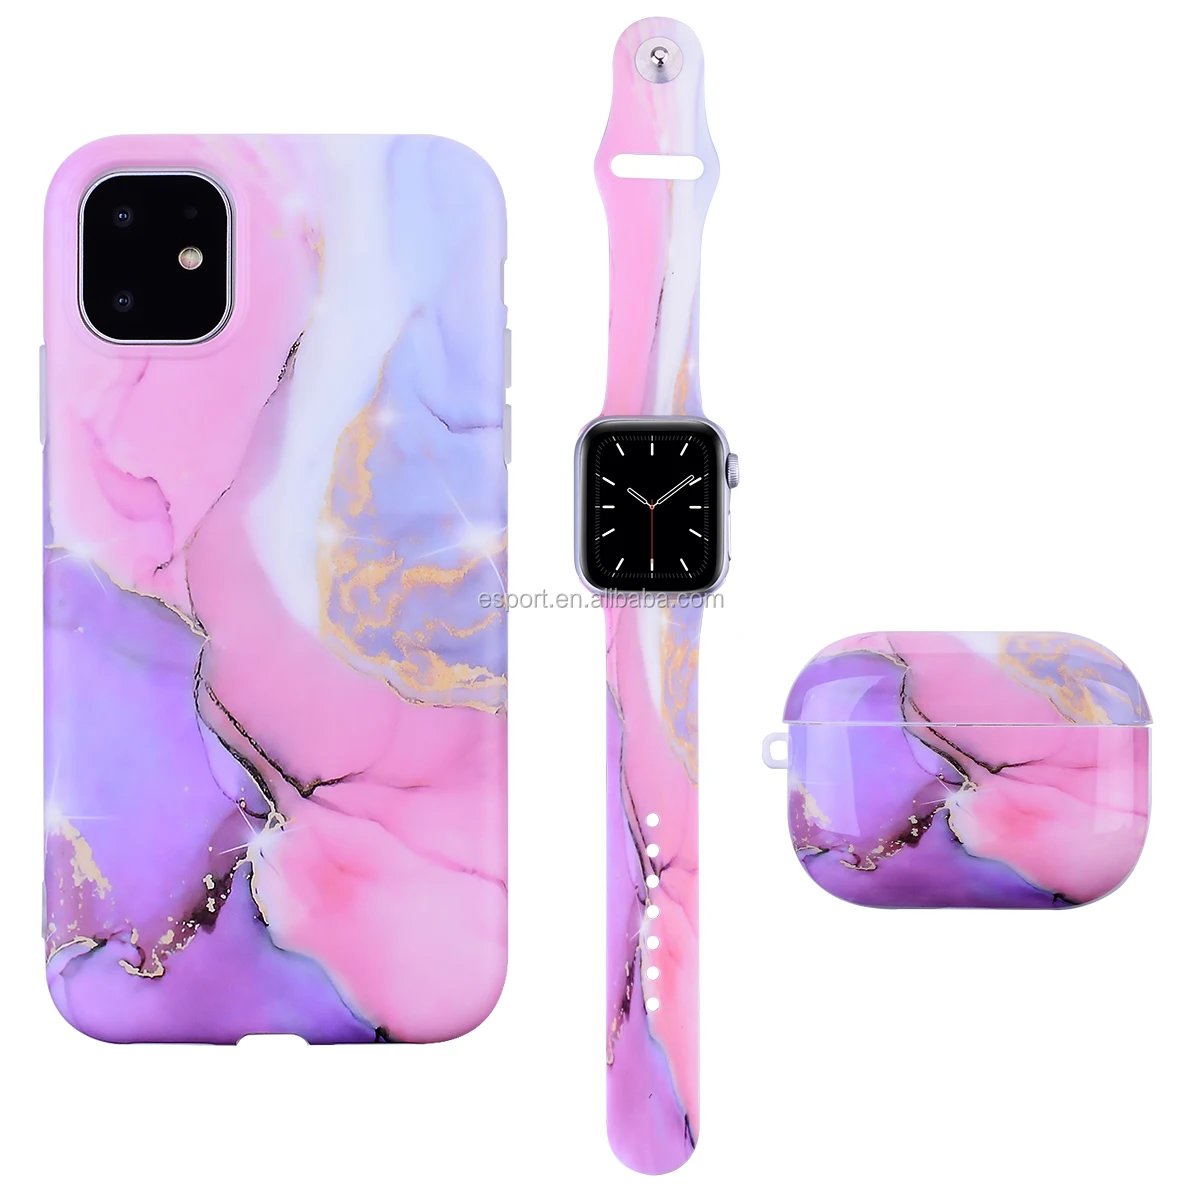 3 In 1 Set Phone Case For Iphone 12 Pro Max 11 Glitter Silicone Marble Phone Case Band For Iwatch Case Set Bundle For Airpod Buy Phone Case With Shoulder Strap Phone